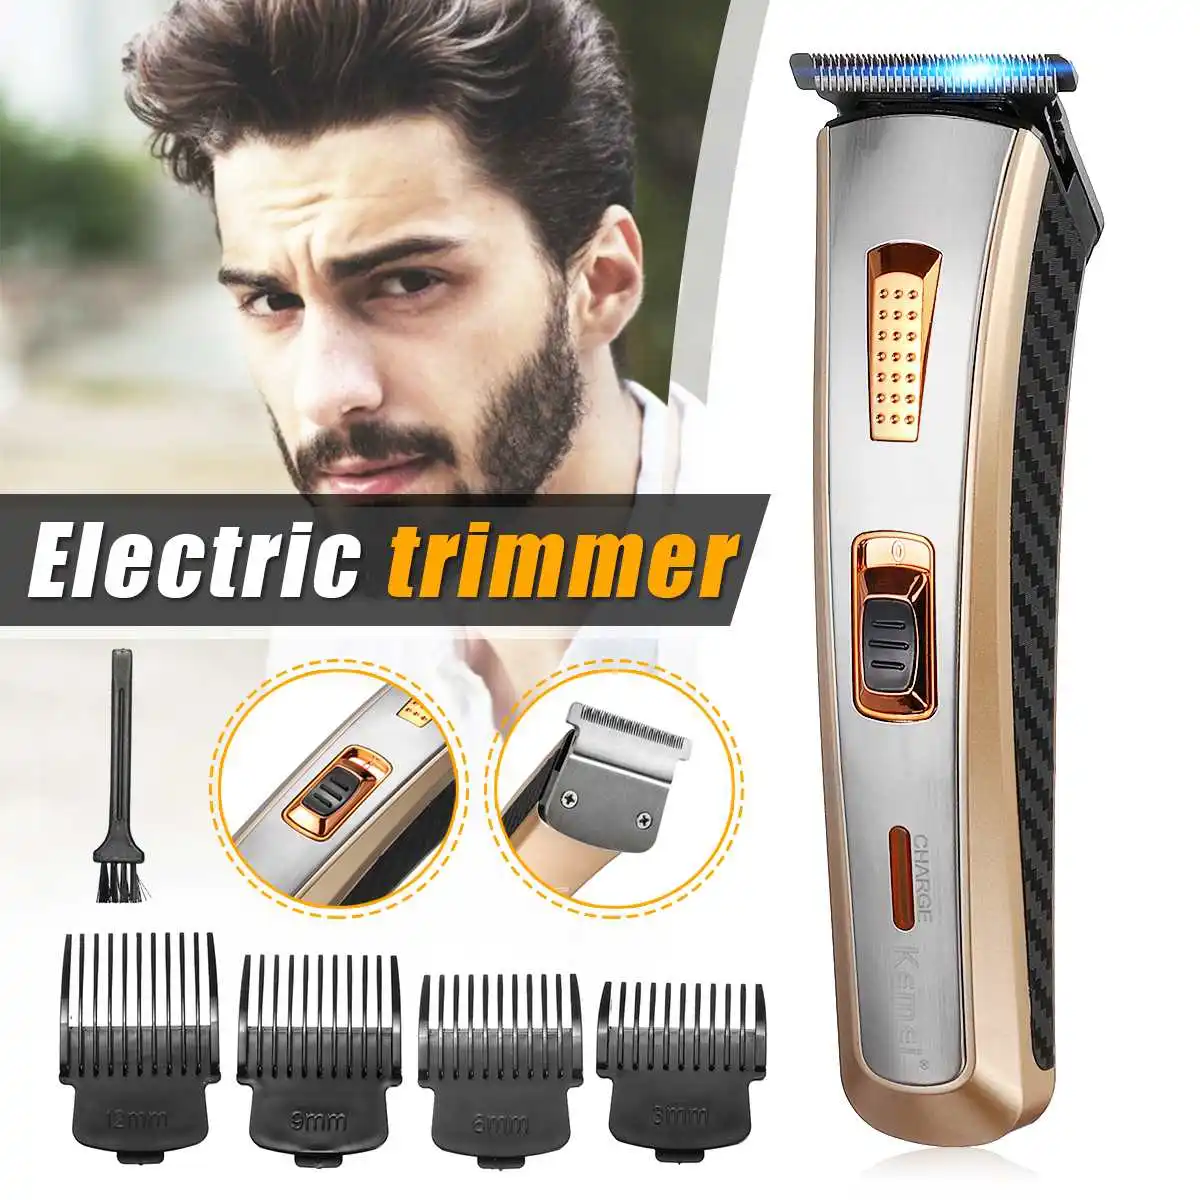 

Professional Hair Clipper Electric Mini Hair Trimmer Shaver Sets Rechargeable Multifunction Haircutting Machine for Barber Men